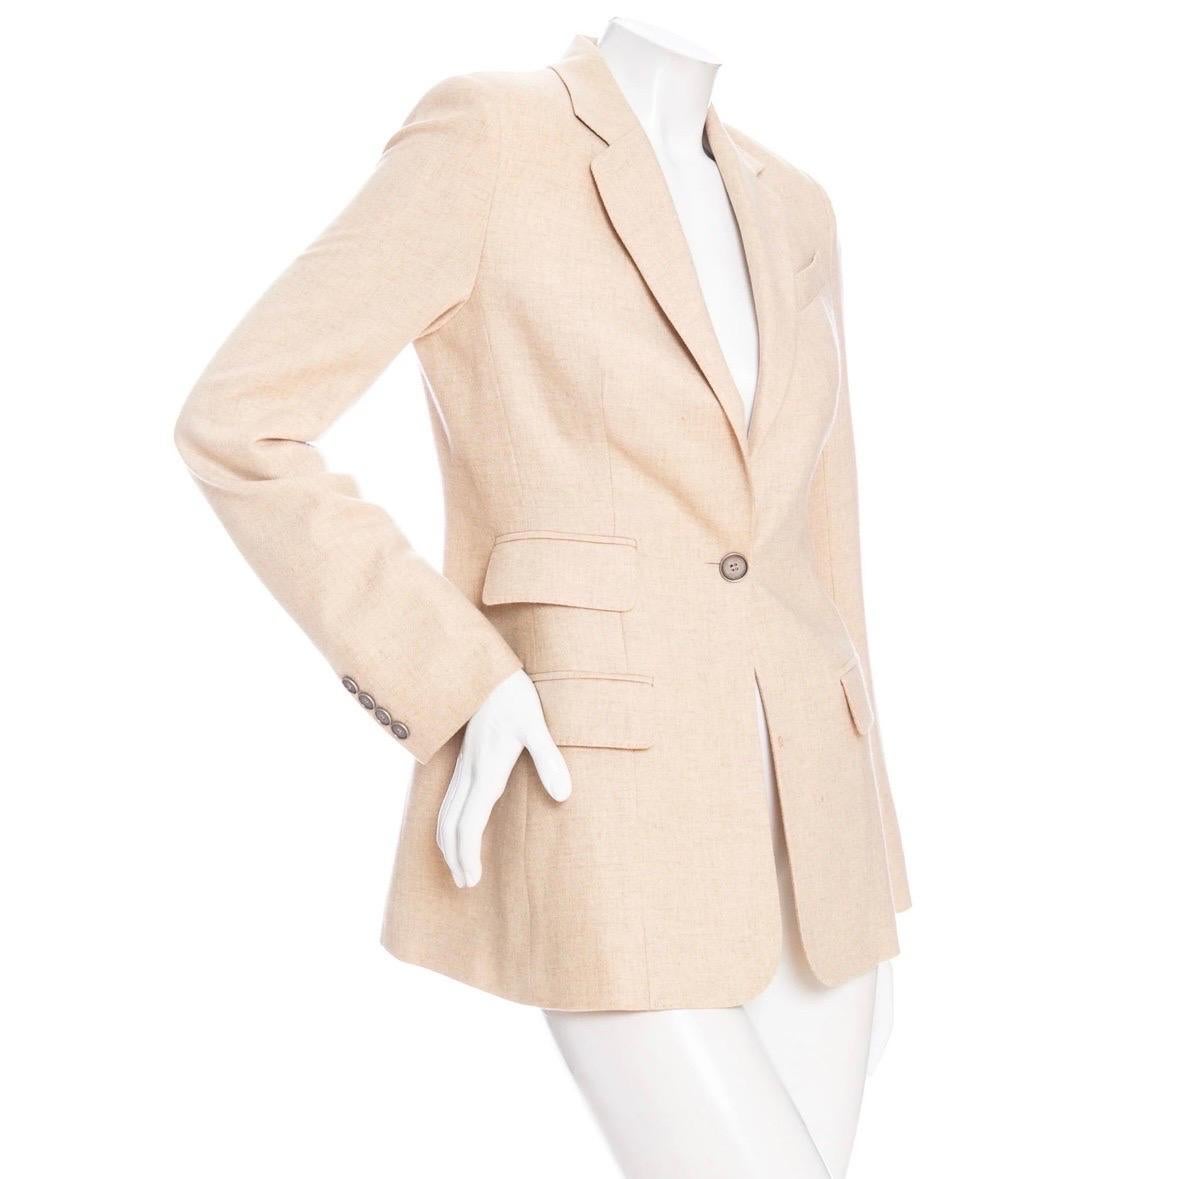 Hermès Sand Cashmere Single-Breasted Blazer 

Sand/Beige
Single-breasted
Button fastening
Notched collar
Asymmetrical front flap pockets
Cuff buttons
Jacquard lining
Fitted silhouette
Made in France
Good preowned condition; moderate staining in